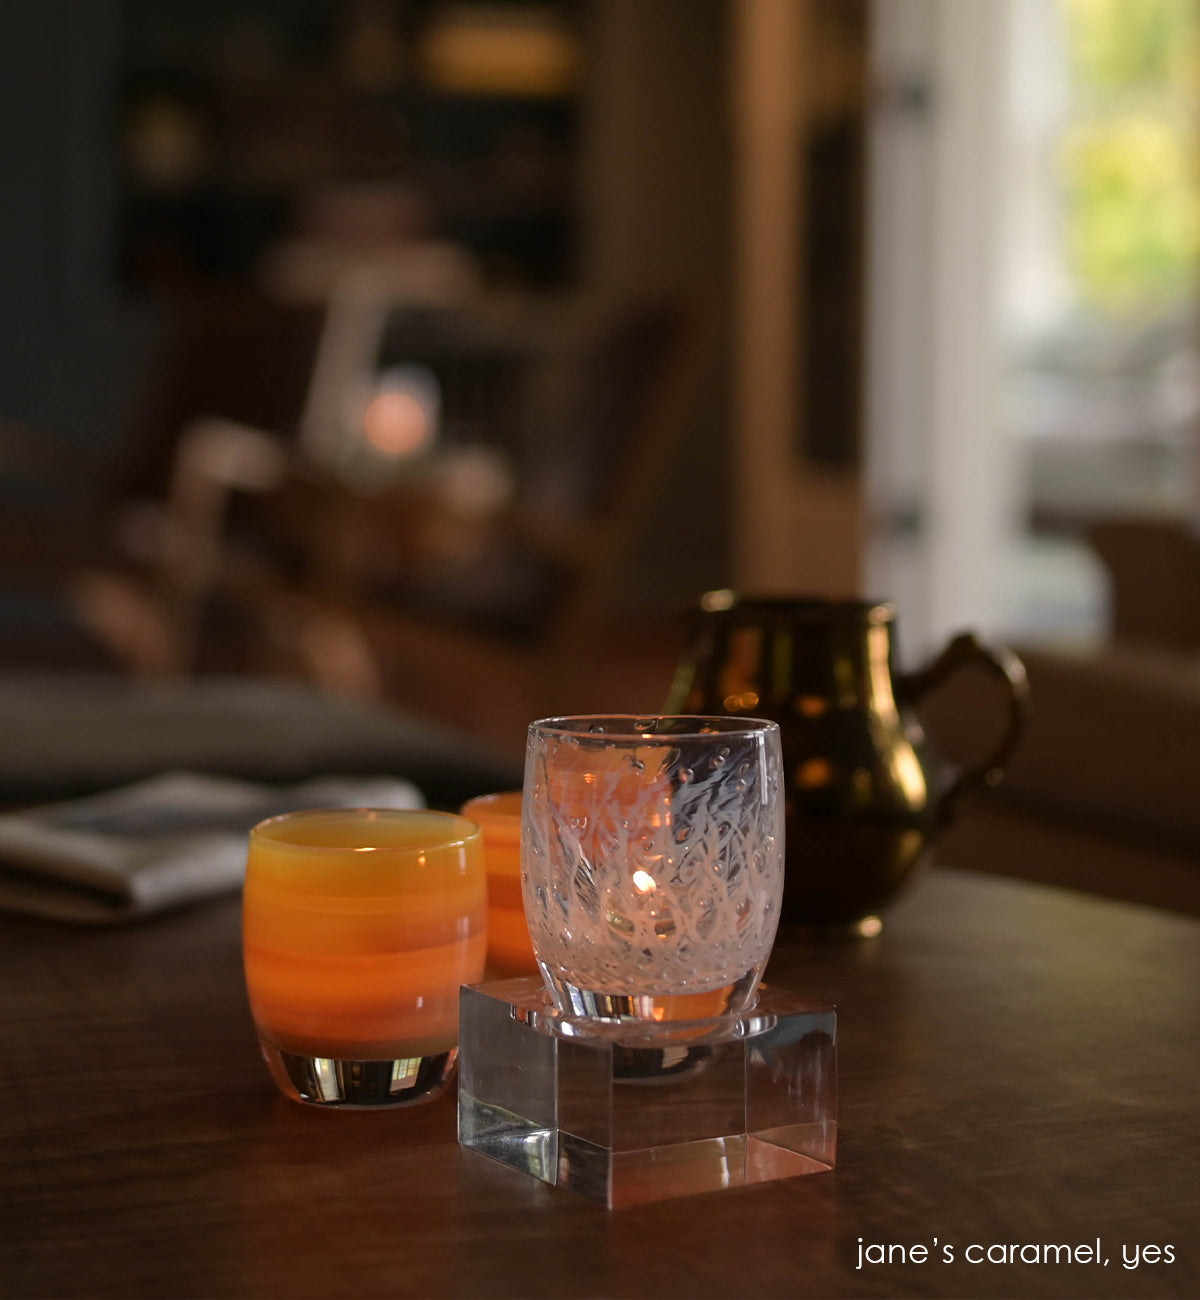 acrylic square baby stand for glassybaby hand-blown glass votive candle holder. Paired with jane's caramel and yes.